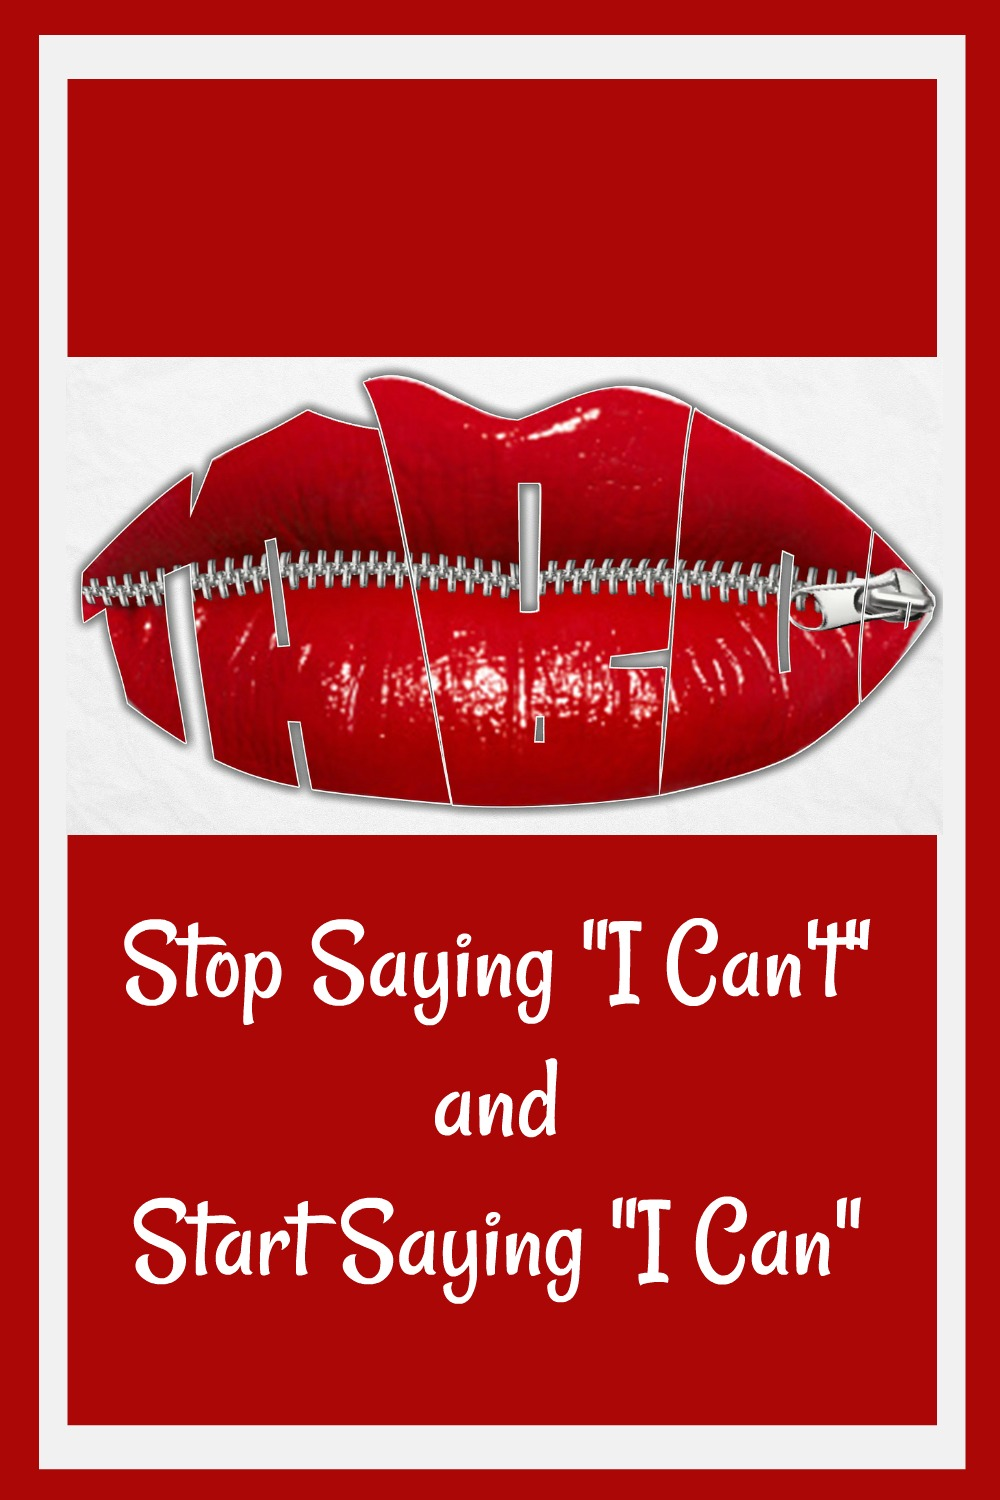 Stop Saying “I Can’t” and Start Saying “I Can”